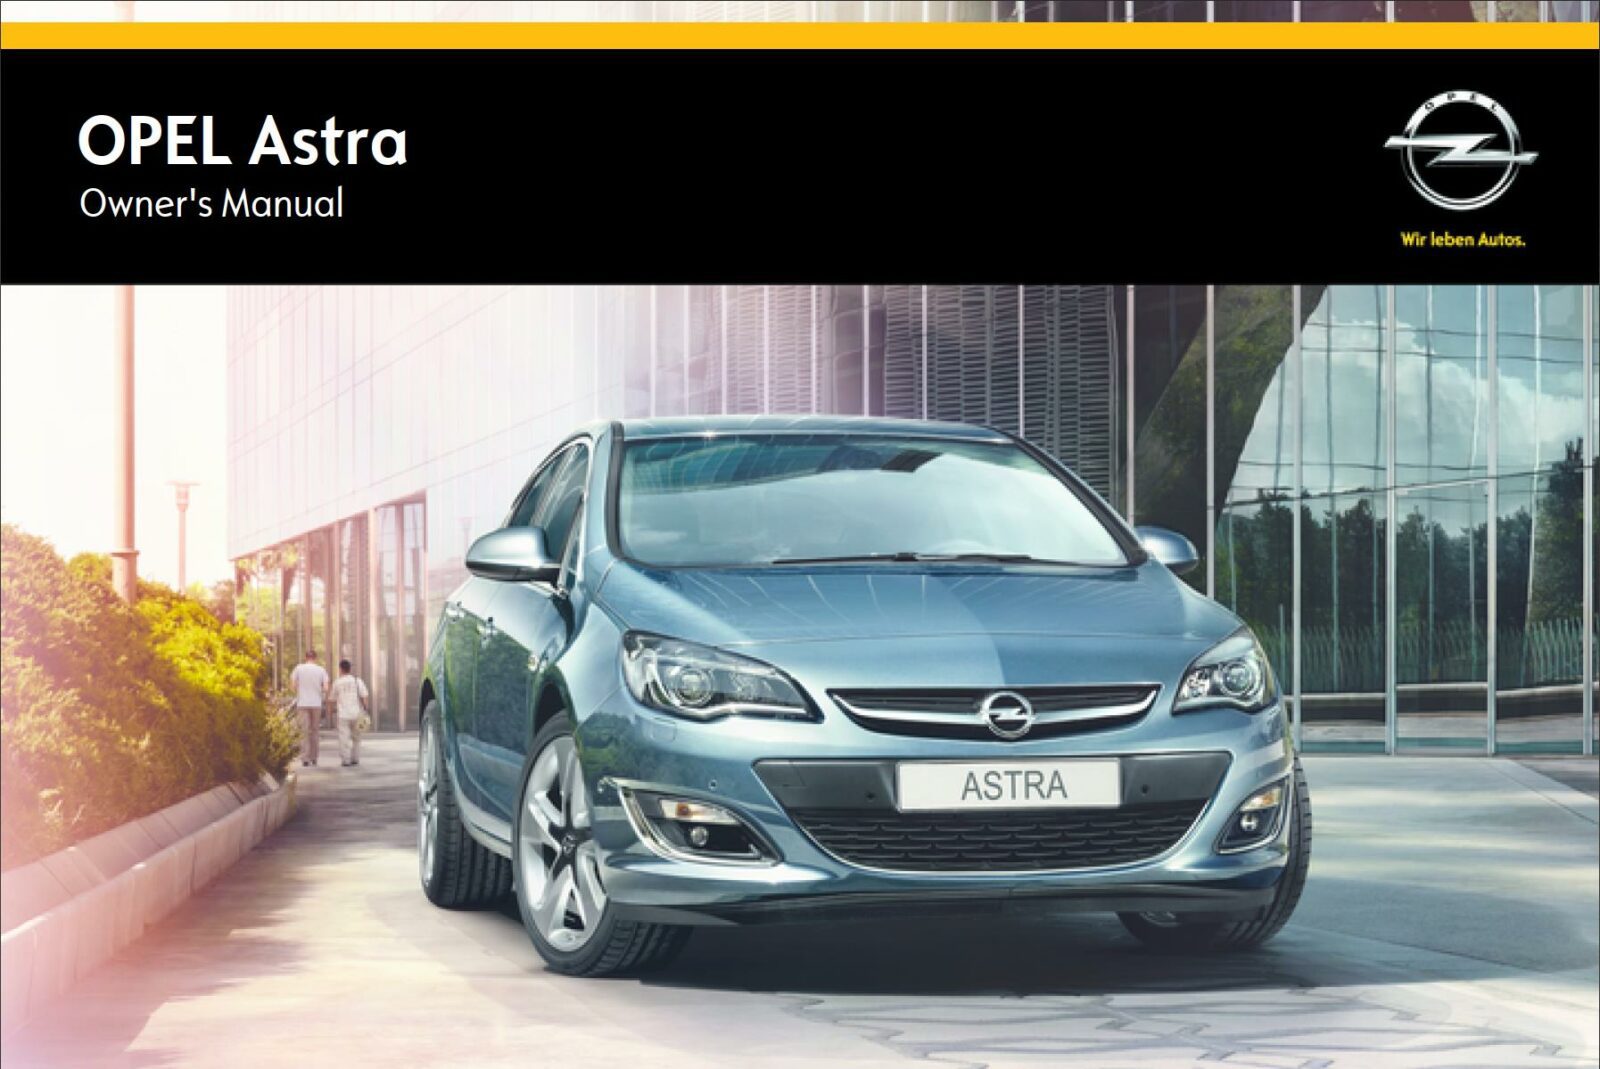 Opel Astra 2015 Owner's Manual – PDF Download